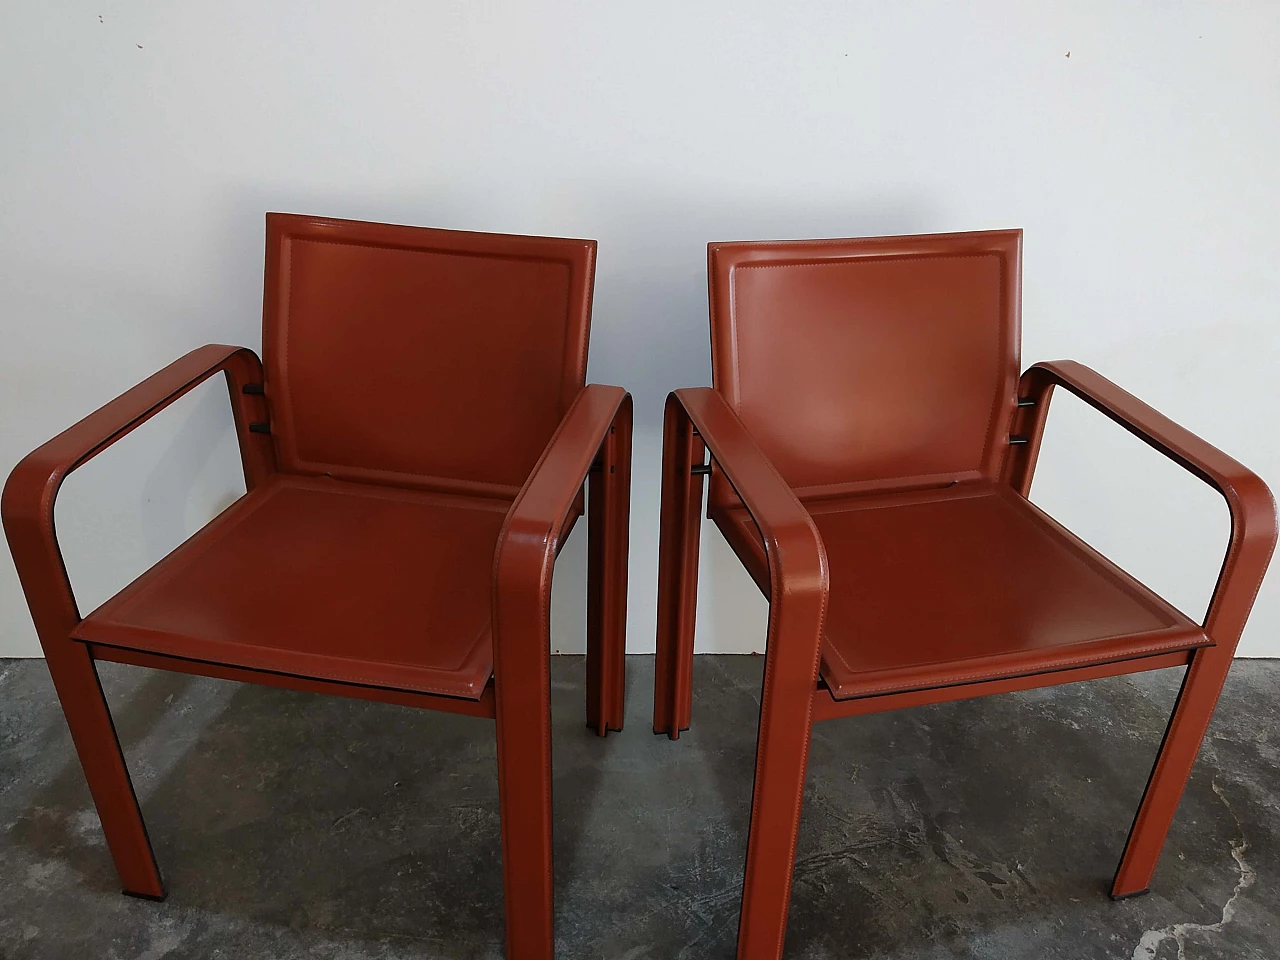 Pair of Golfo dei Poeti chairs by Toussaint & Angeloni manufactured by Matteo Grassi, 1980s 3